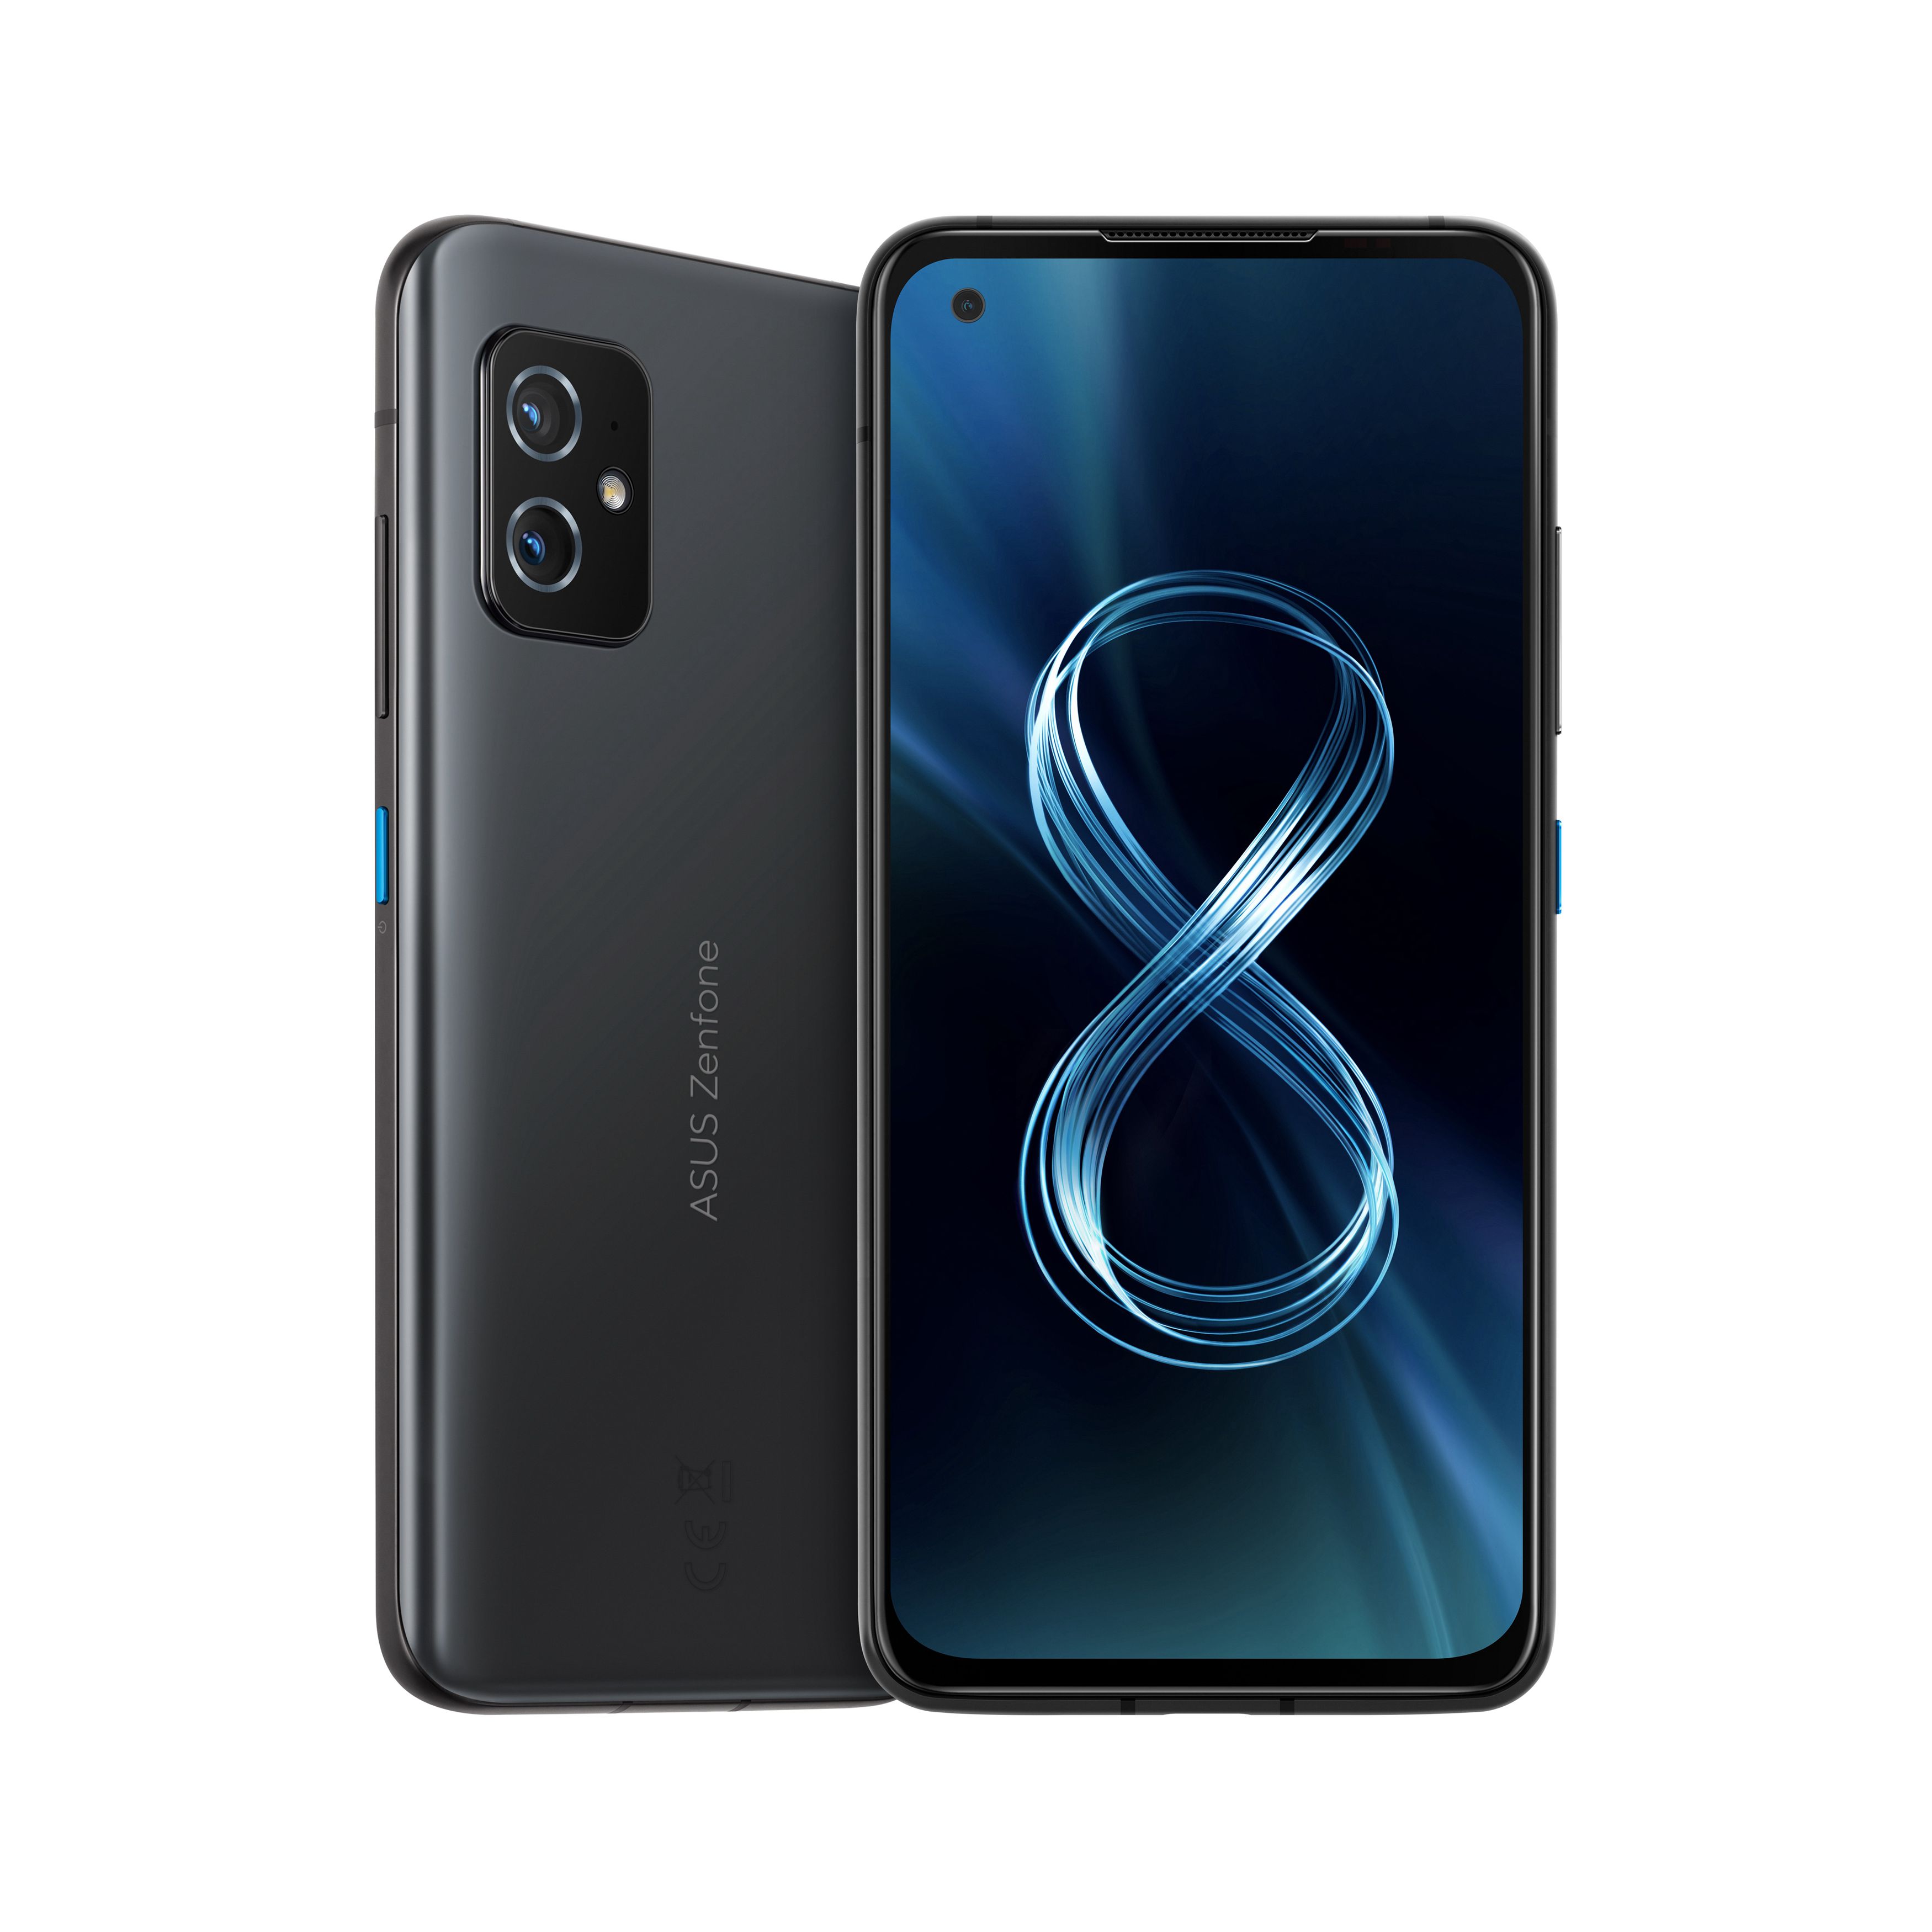 Pixelworks Display Technology Powers ASUS Zenfone 8 Series